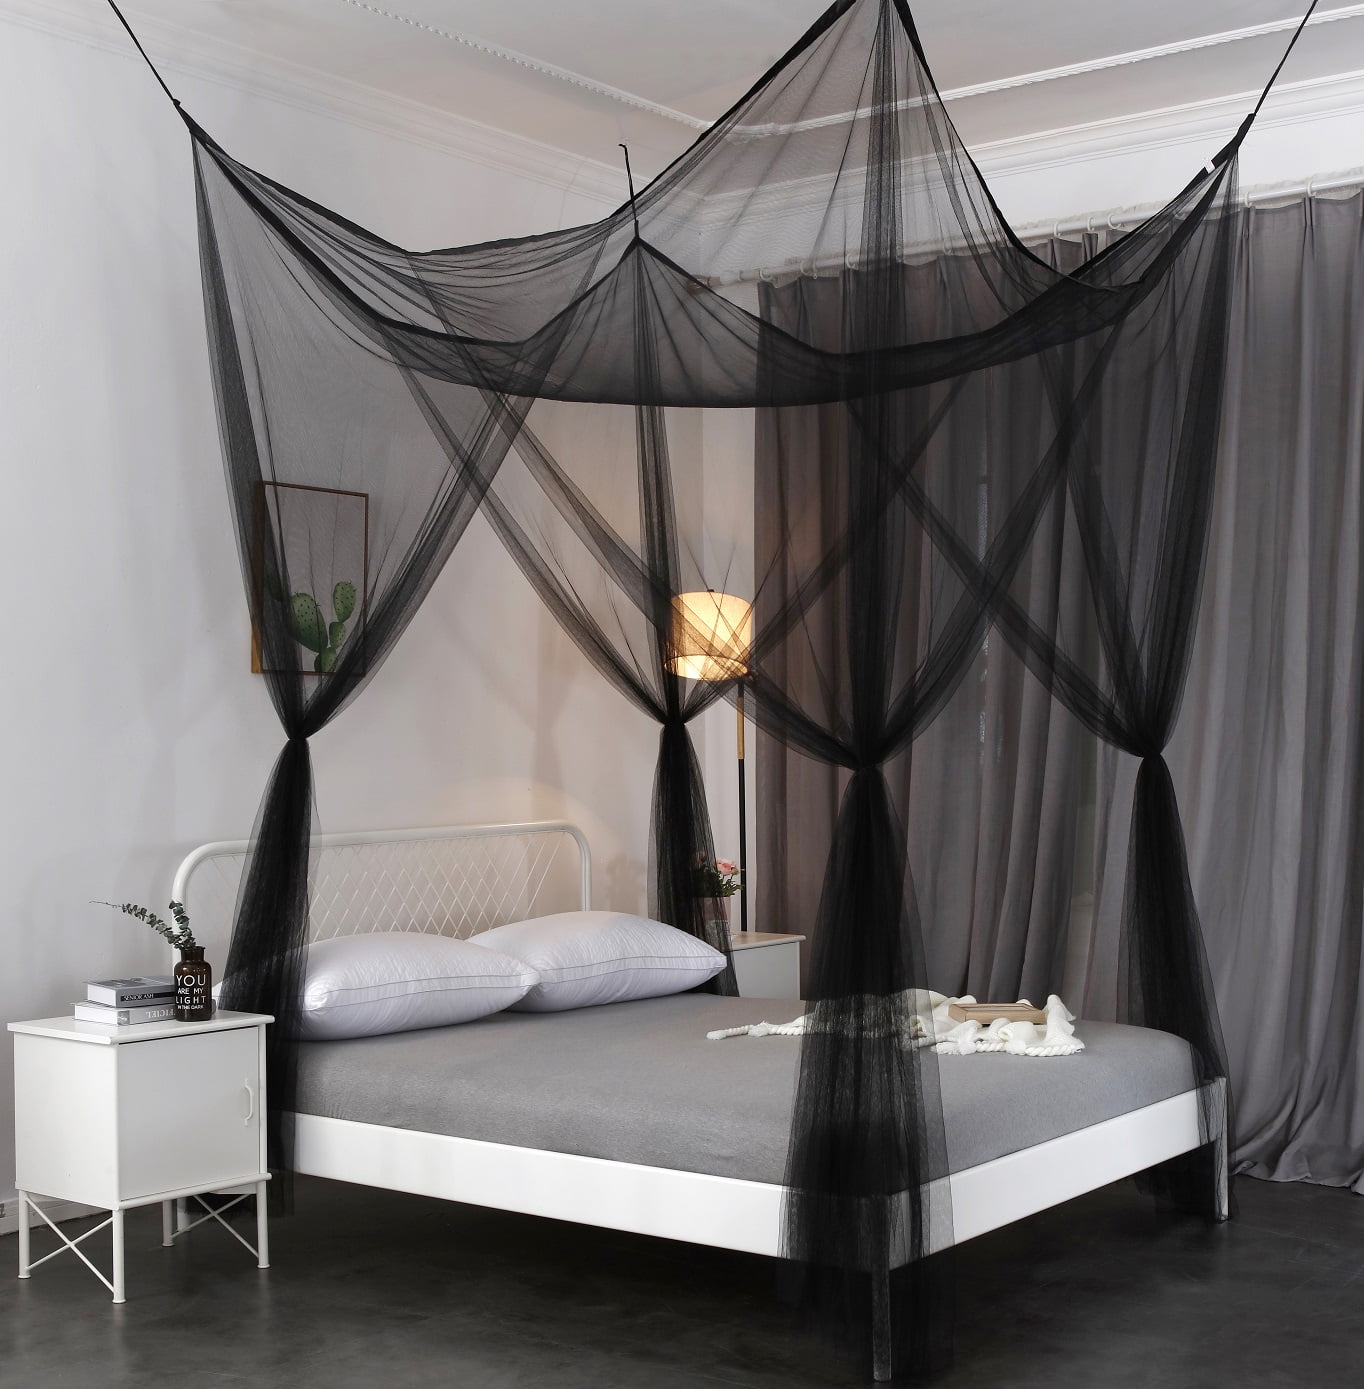 CANOPY MIMPI Muslin Mosquito Net for Four Poster Bed King,Queen,Double,Daybed 